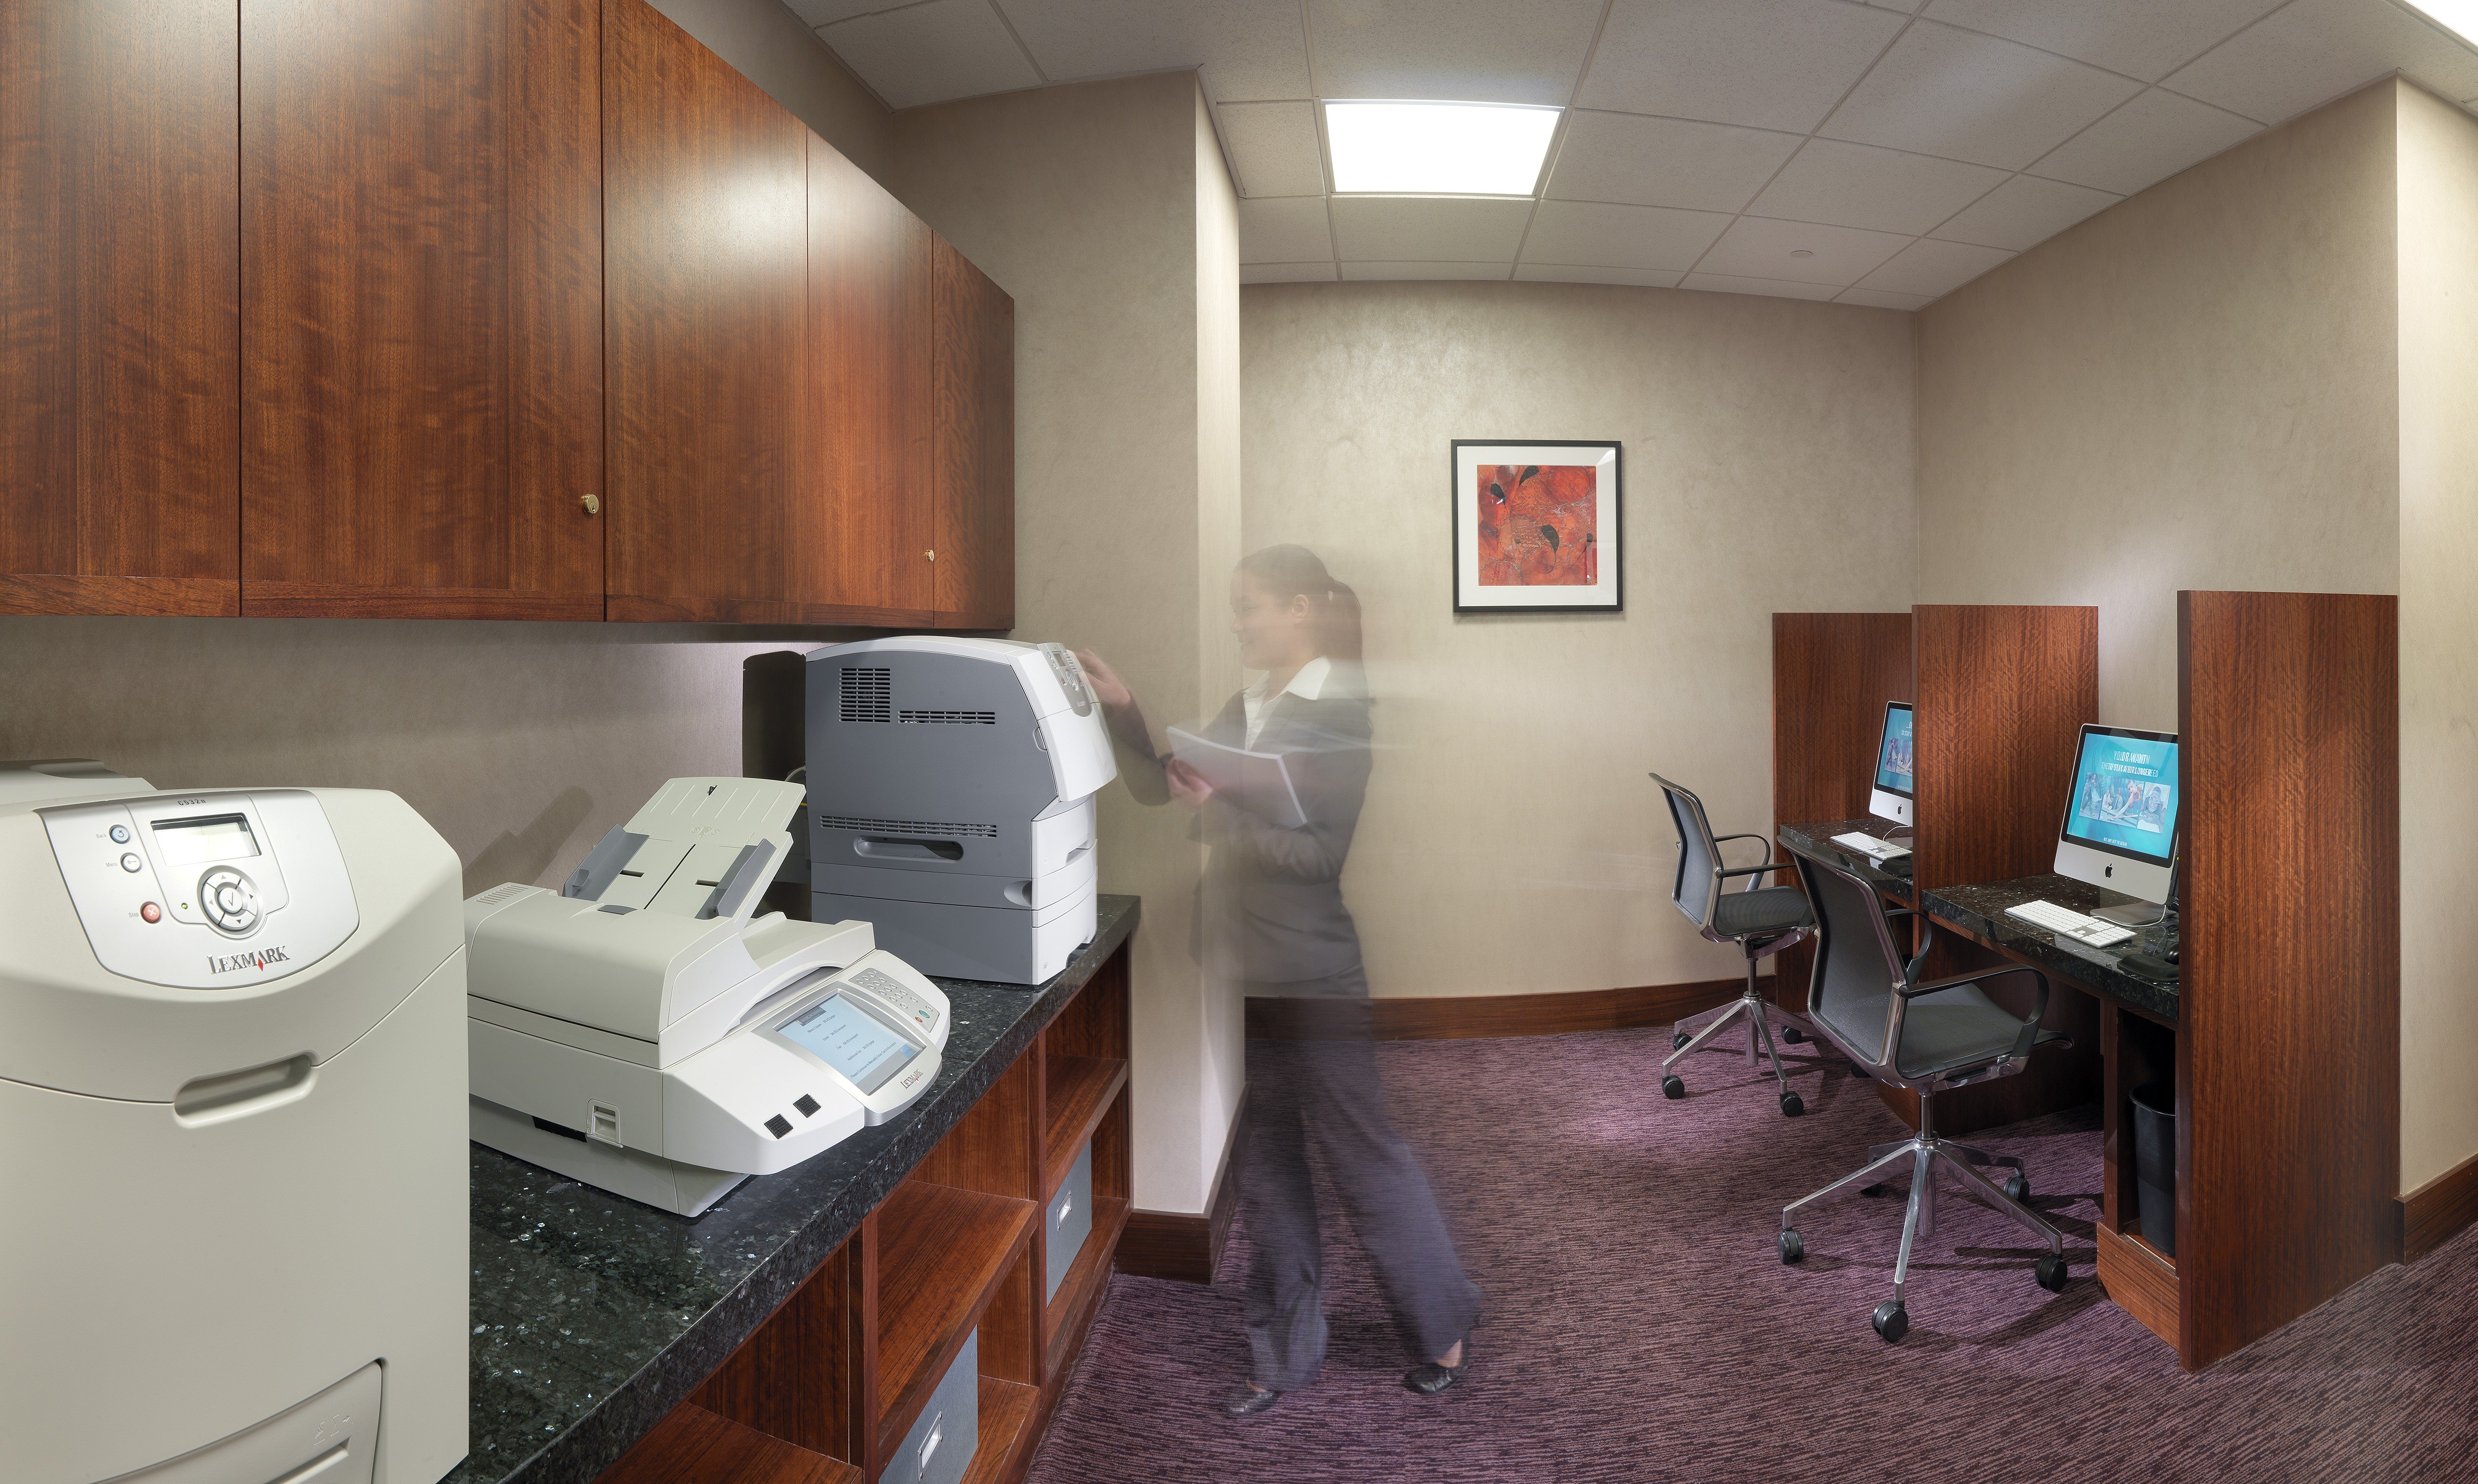 Business Center - Print, Copy, Fax and other services.